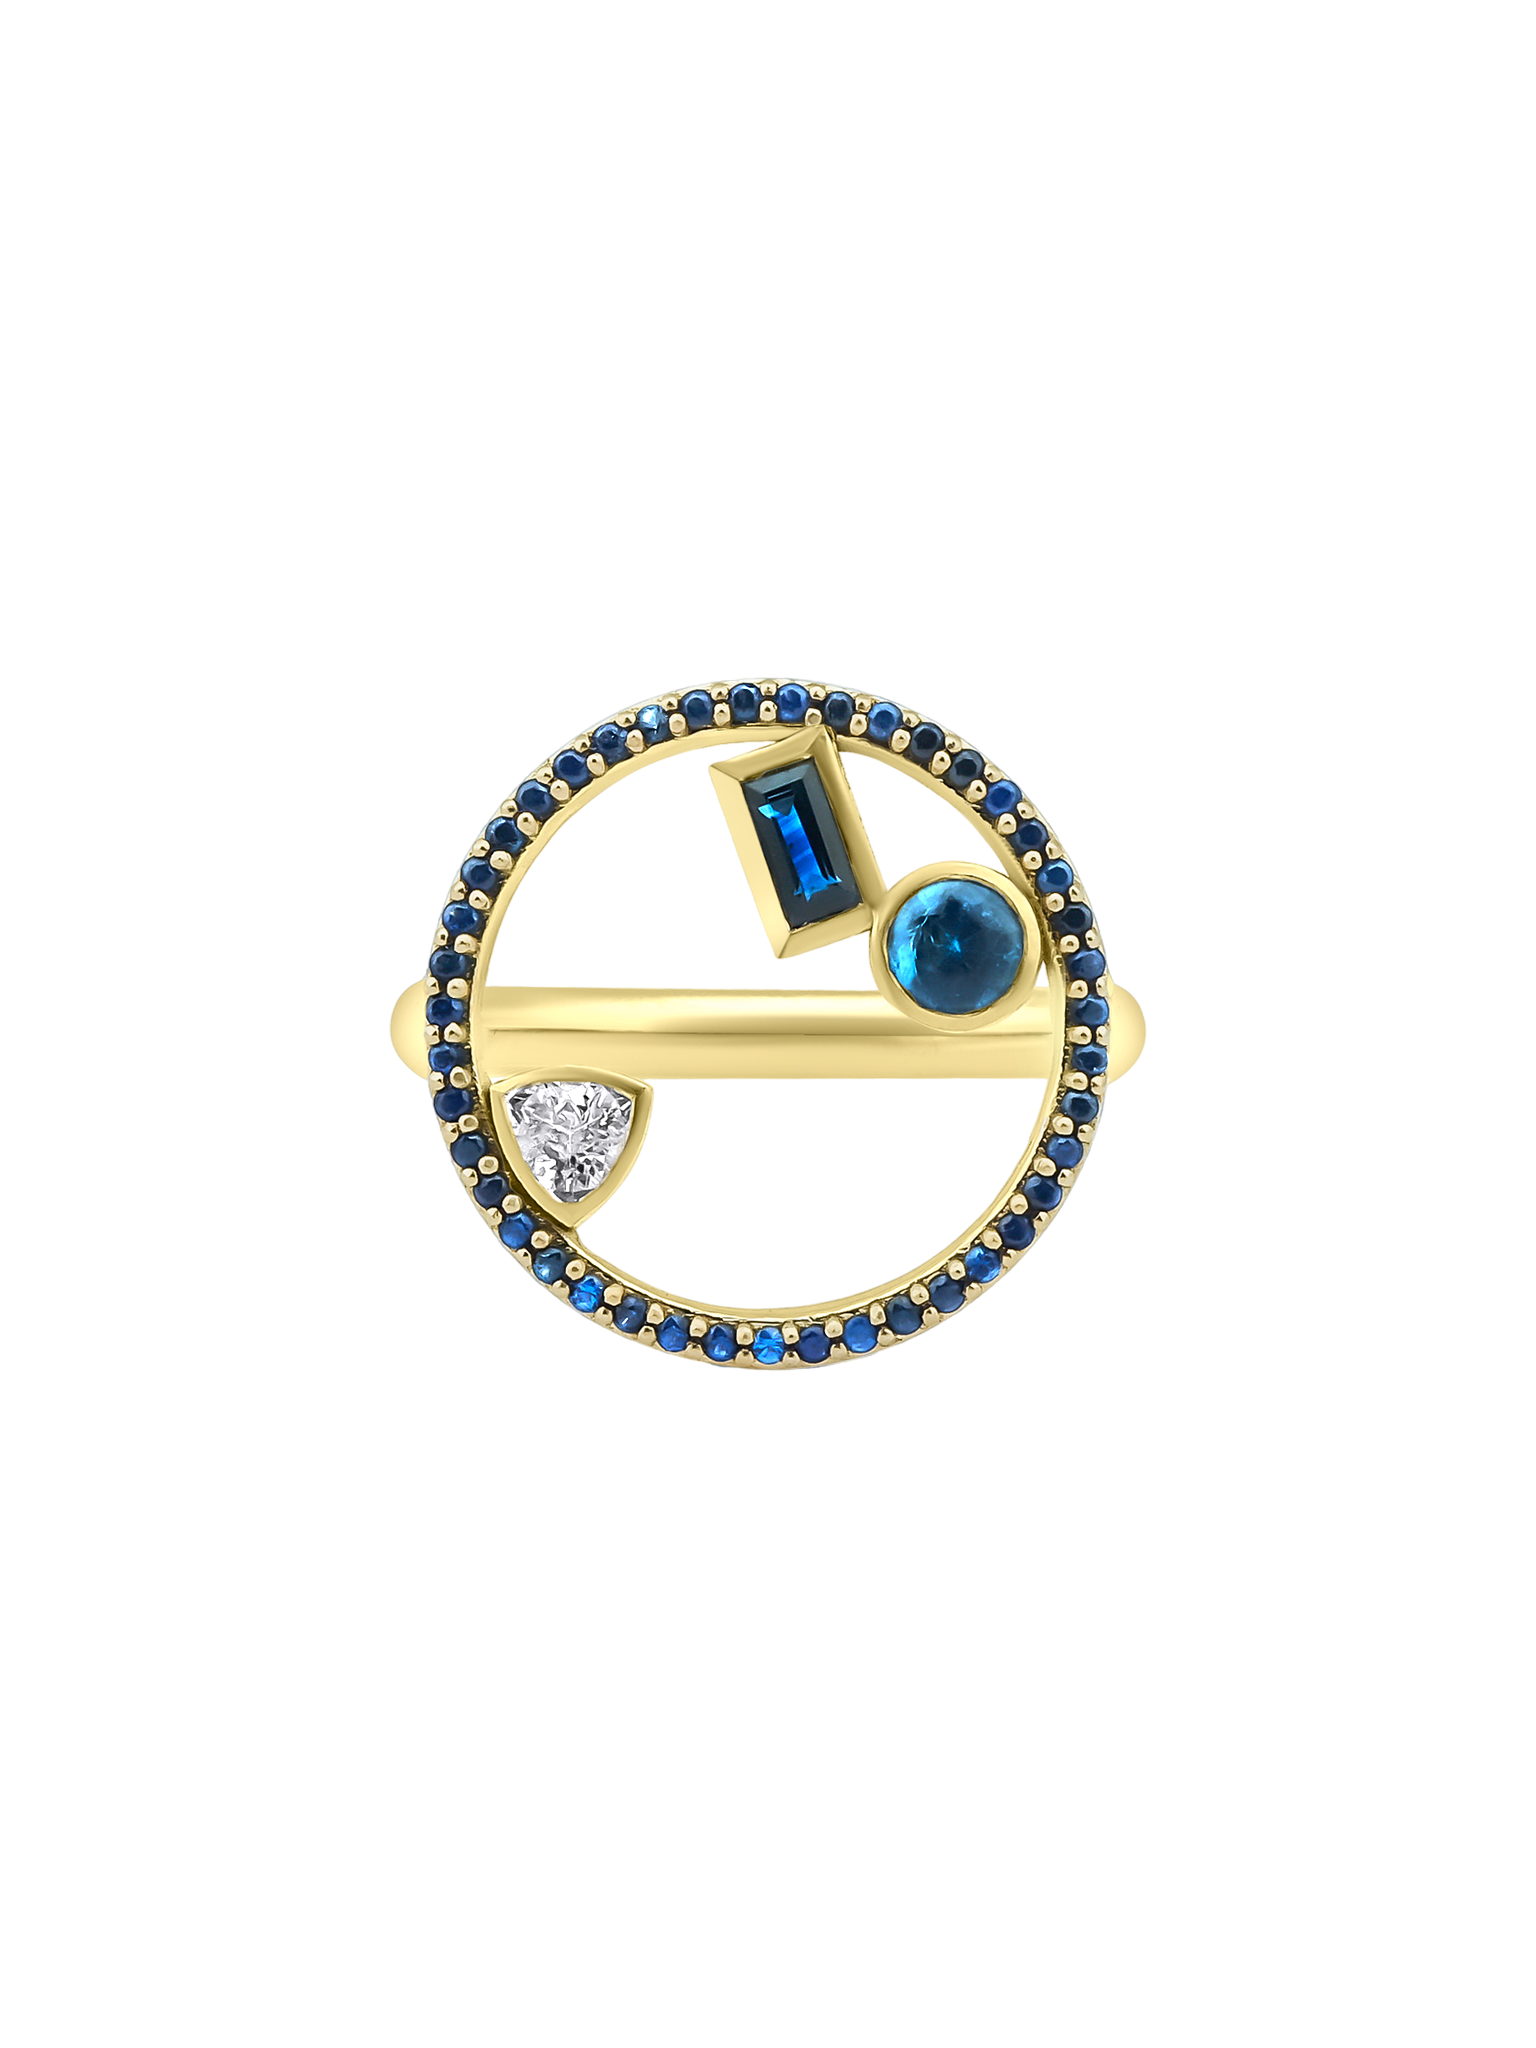 Project 2020 ring with sapphires